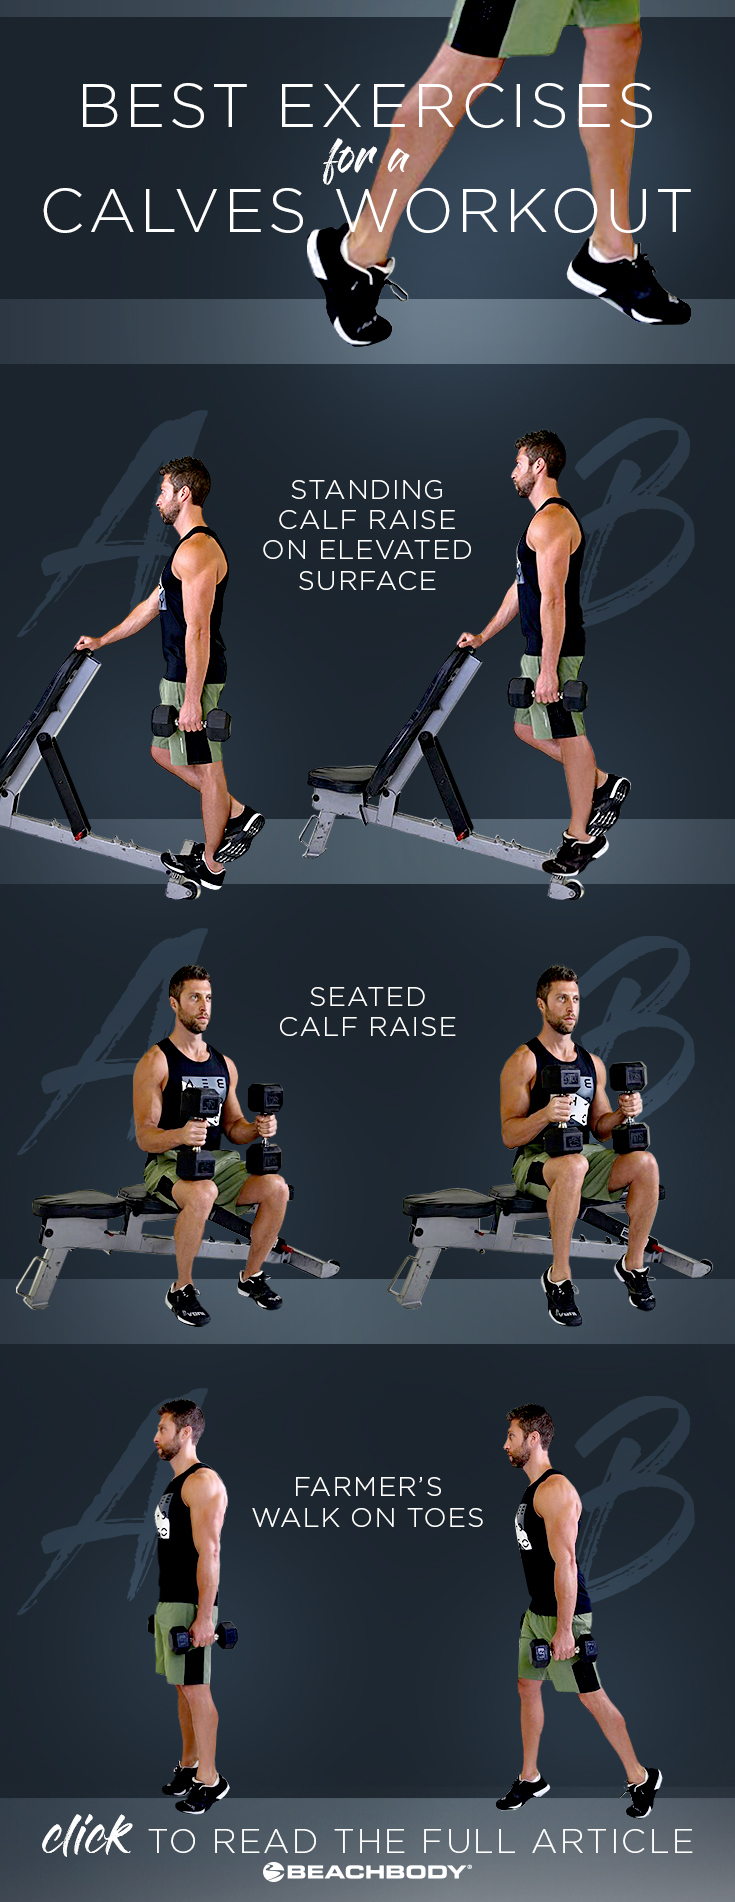 Start building bigger calf muscles with this calves workout at home. The list of exercises and stretches will help you get on your way to building stronger, more defined calf muscles.